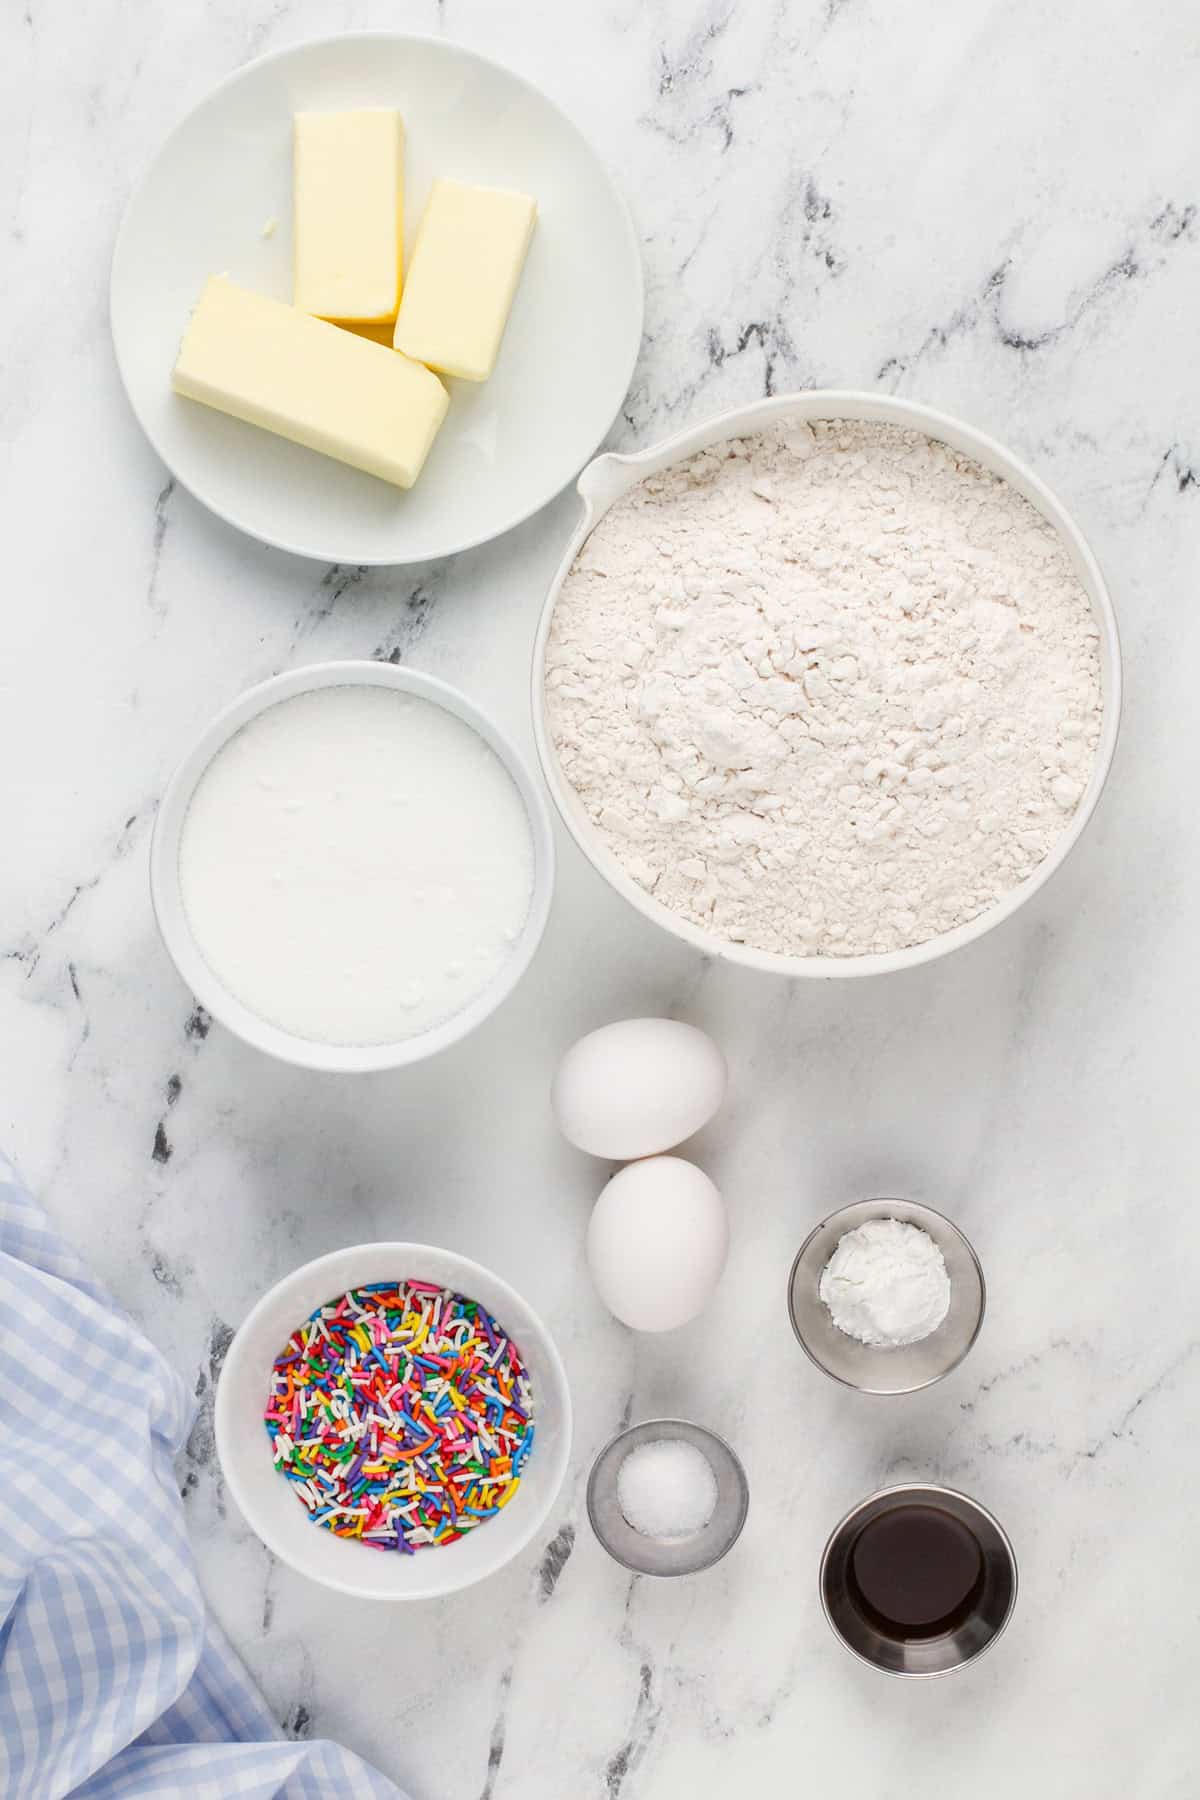 Ingredients for birthday cake cookies arranged on a marble countertop.